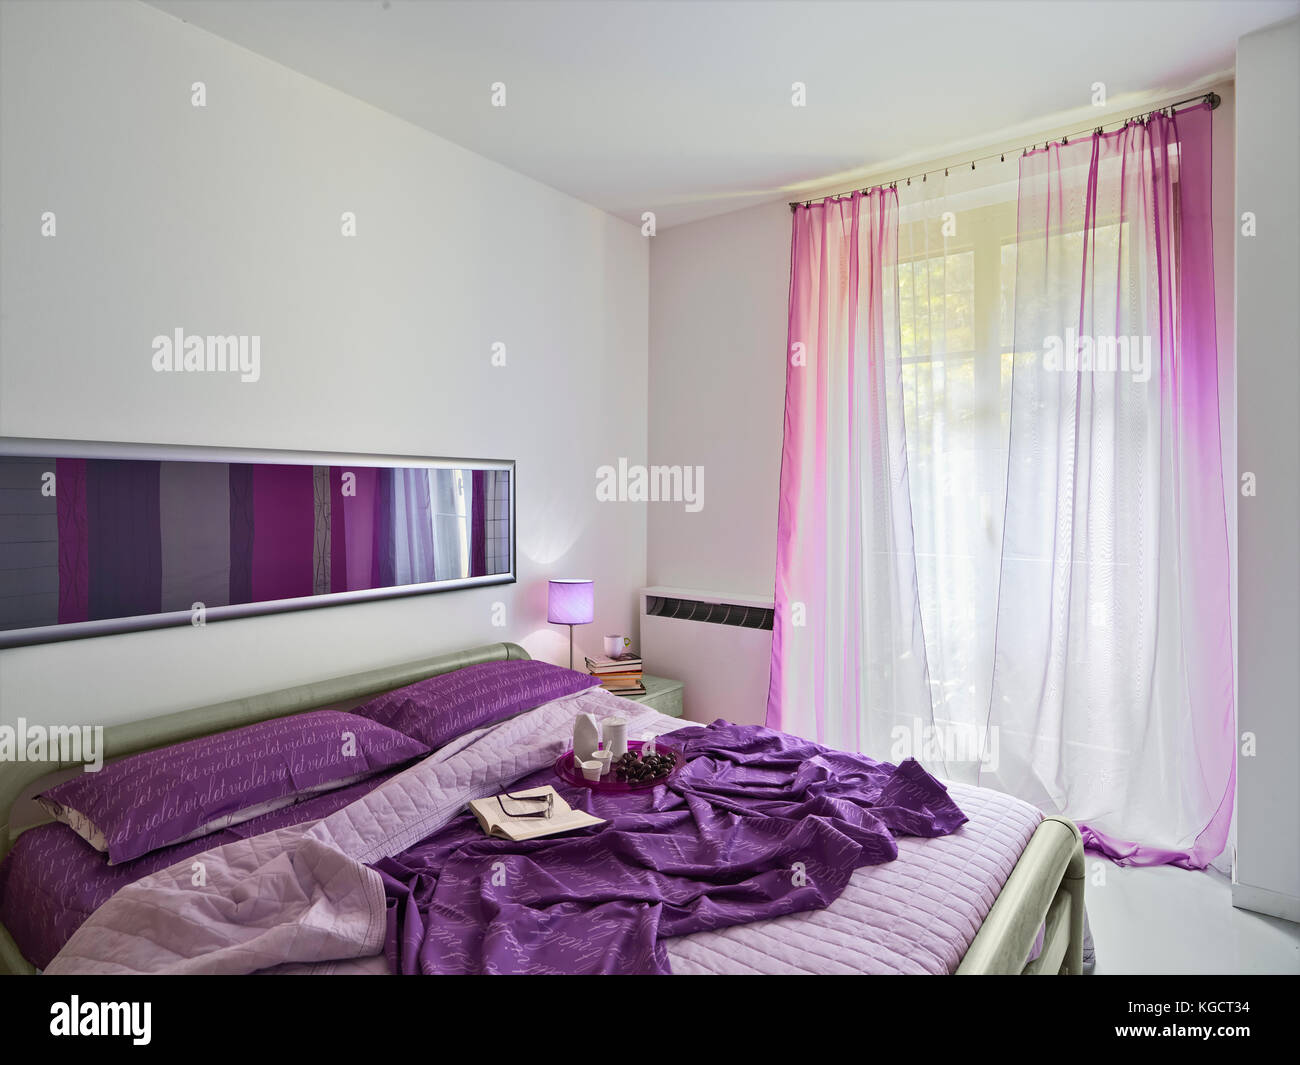 interior view of a modern bedroom with purple bedspread Stock Photo